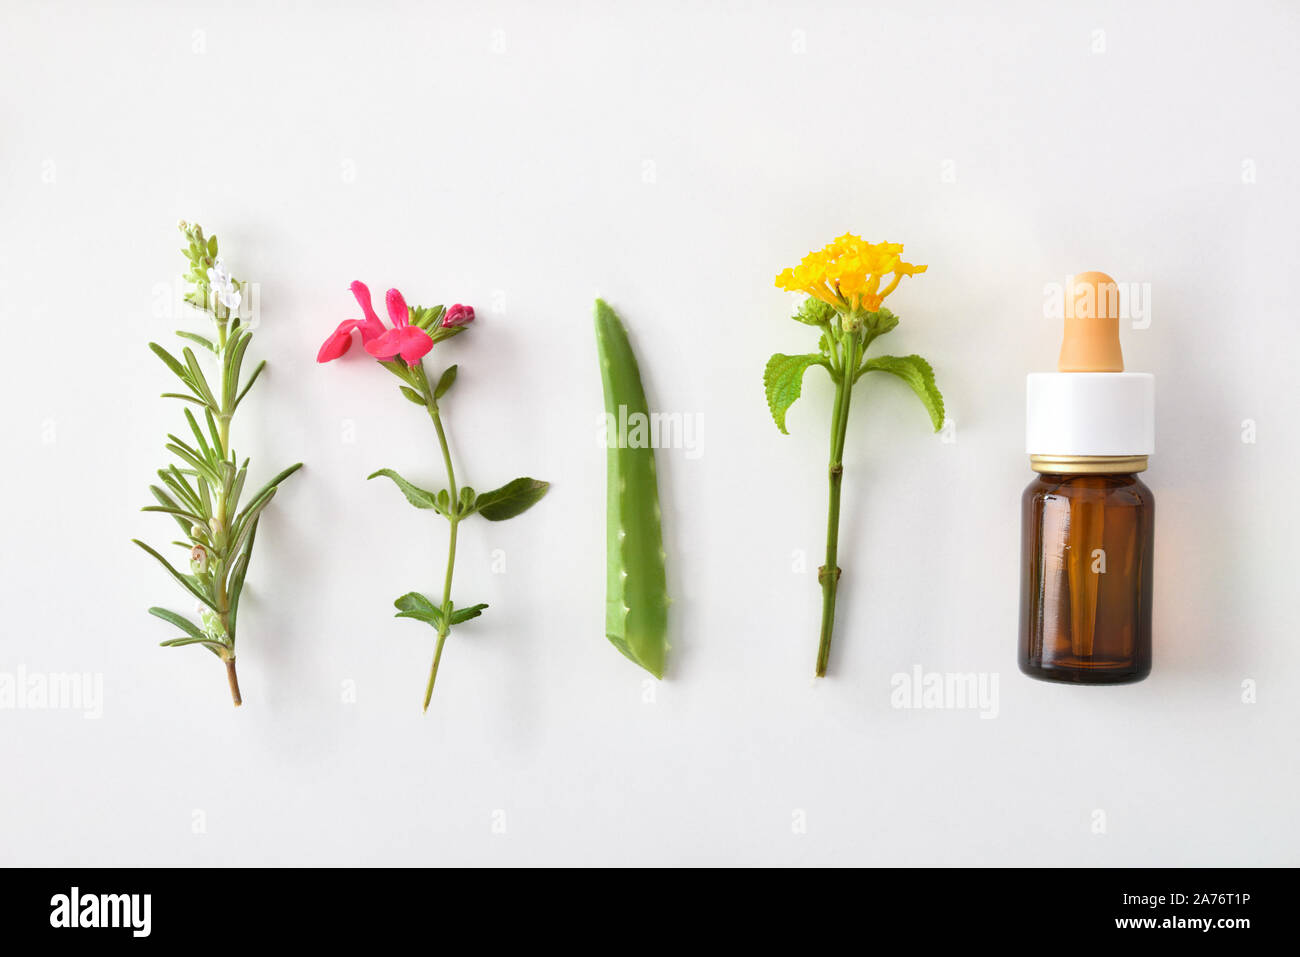 Concept of traditional natural medicine with plants and dropper bottle on white table. Natural medicine concept. Top view. Horizontal composition. Stock Photo